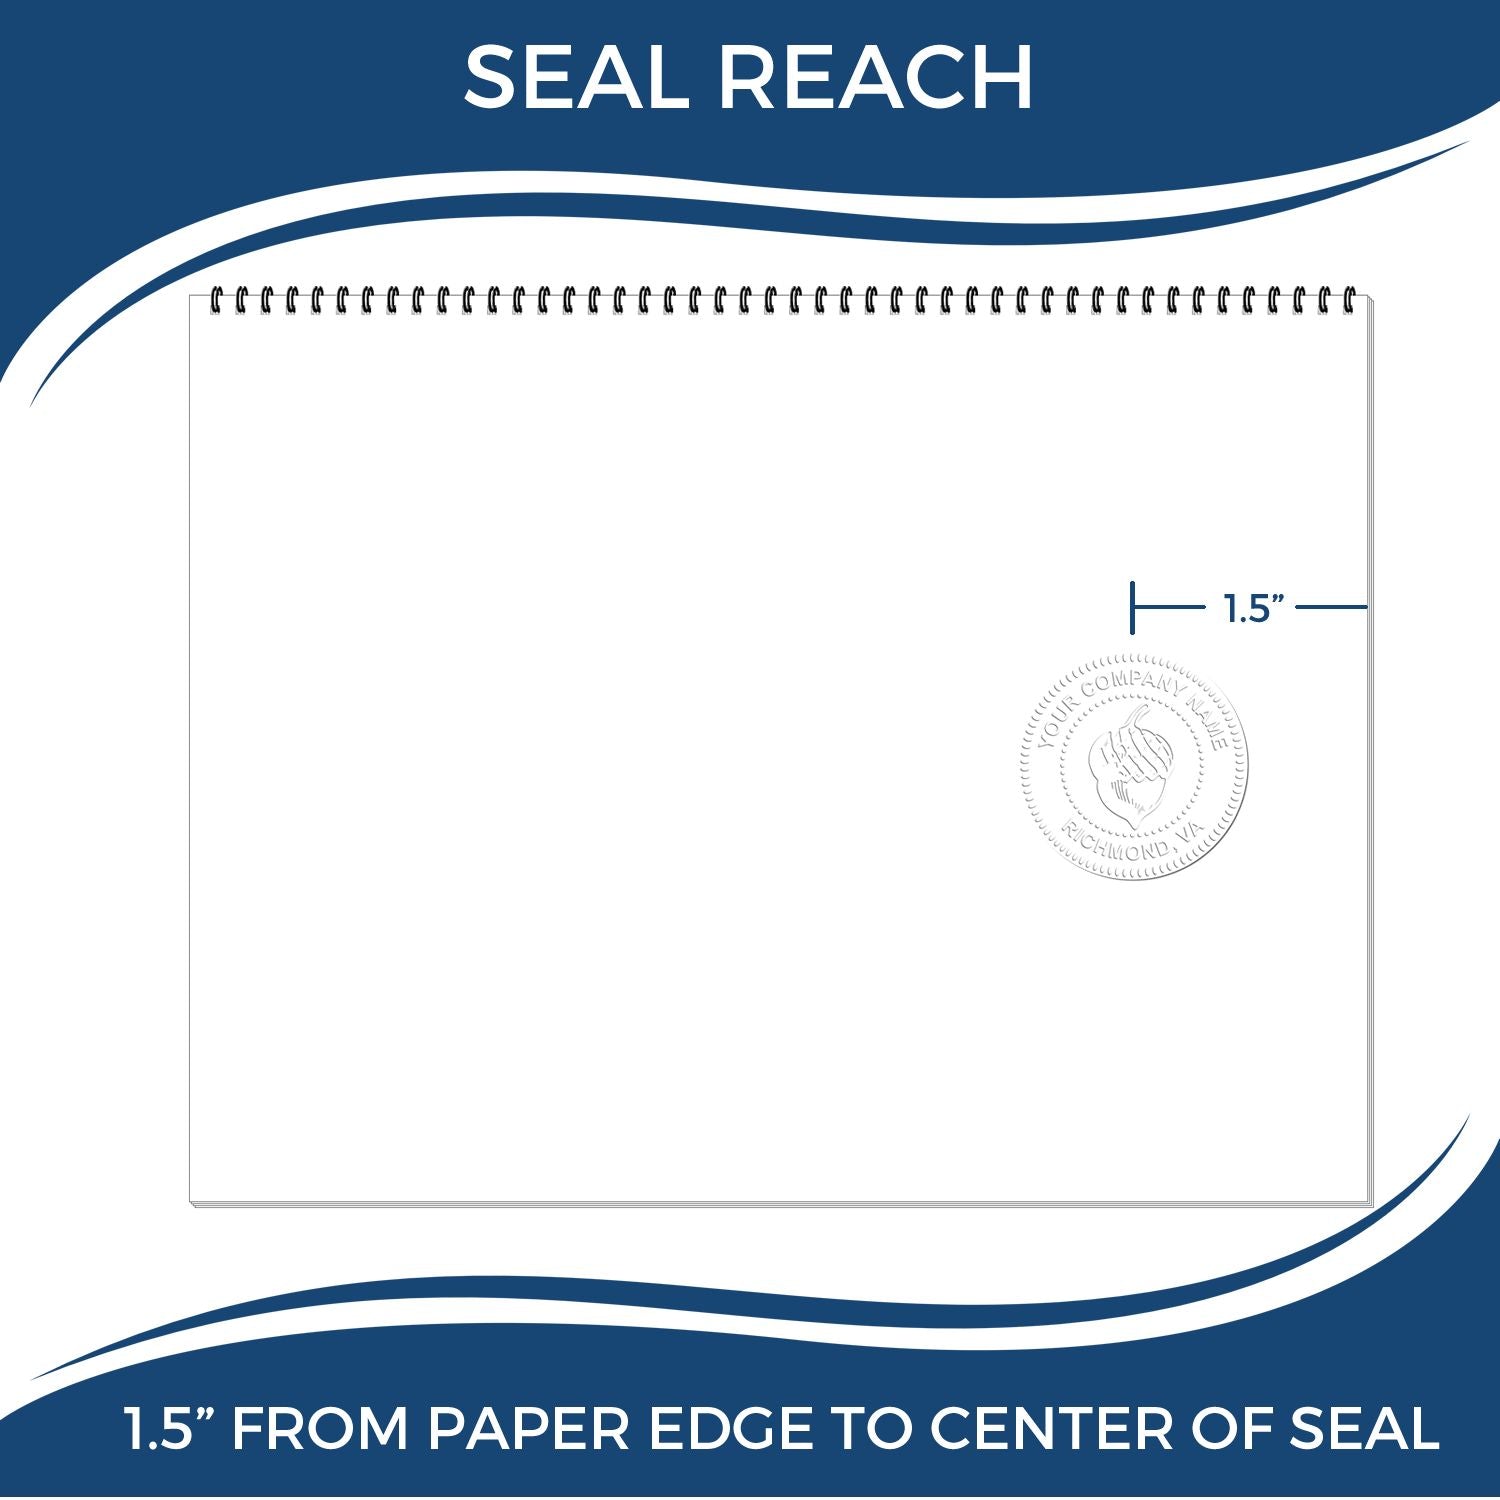 An infographic showing the seal reach which is represented by a ruler and a miniature seal image of the Handheld Puerto Rico Professional Engineer Embosser